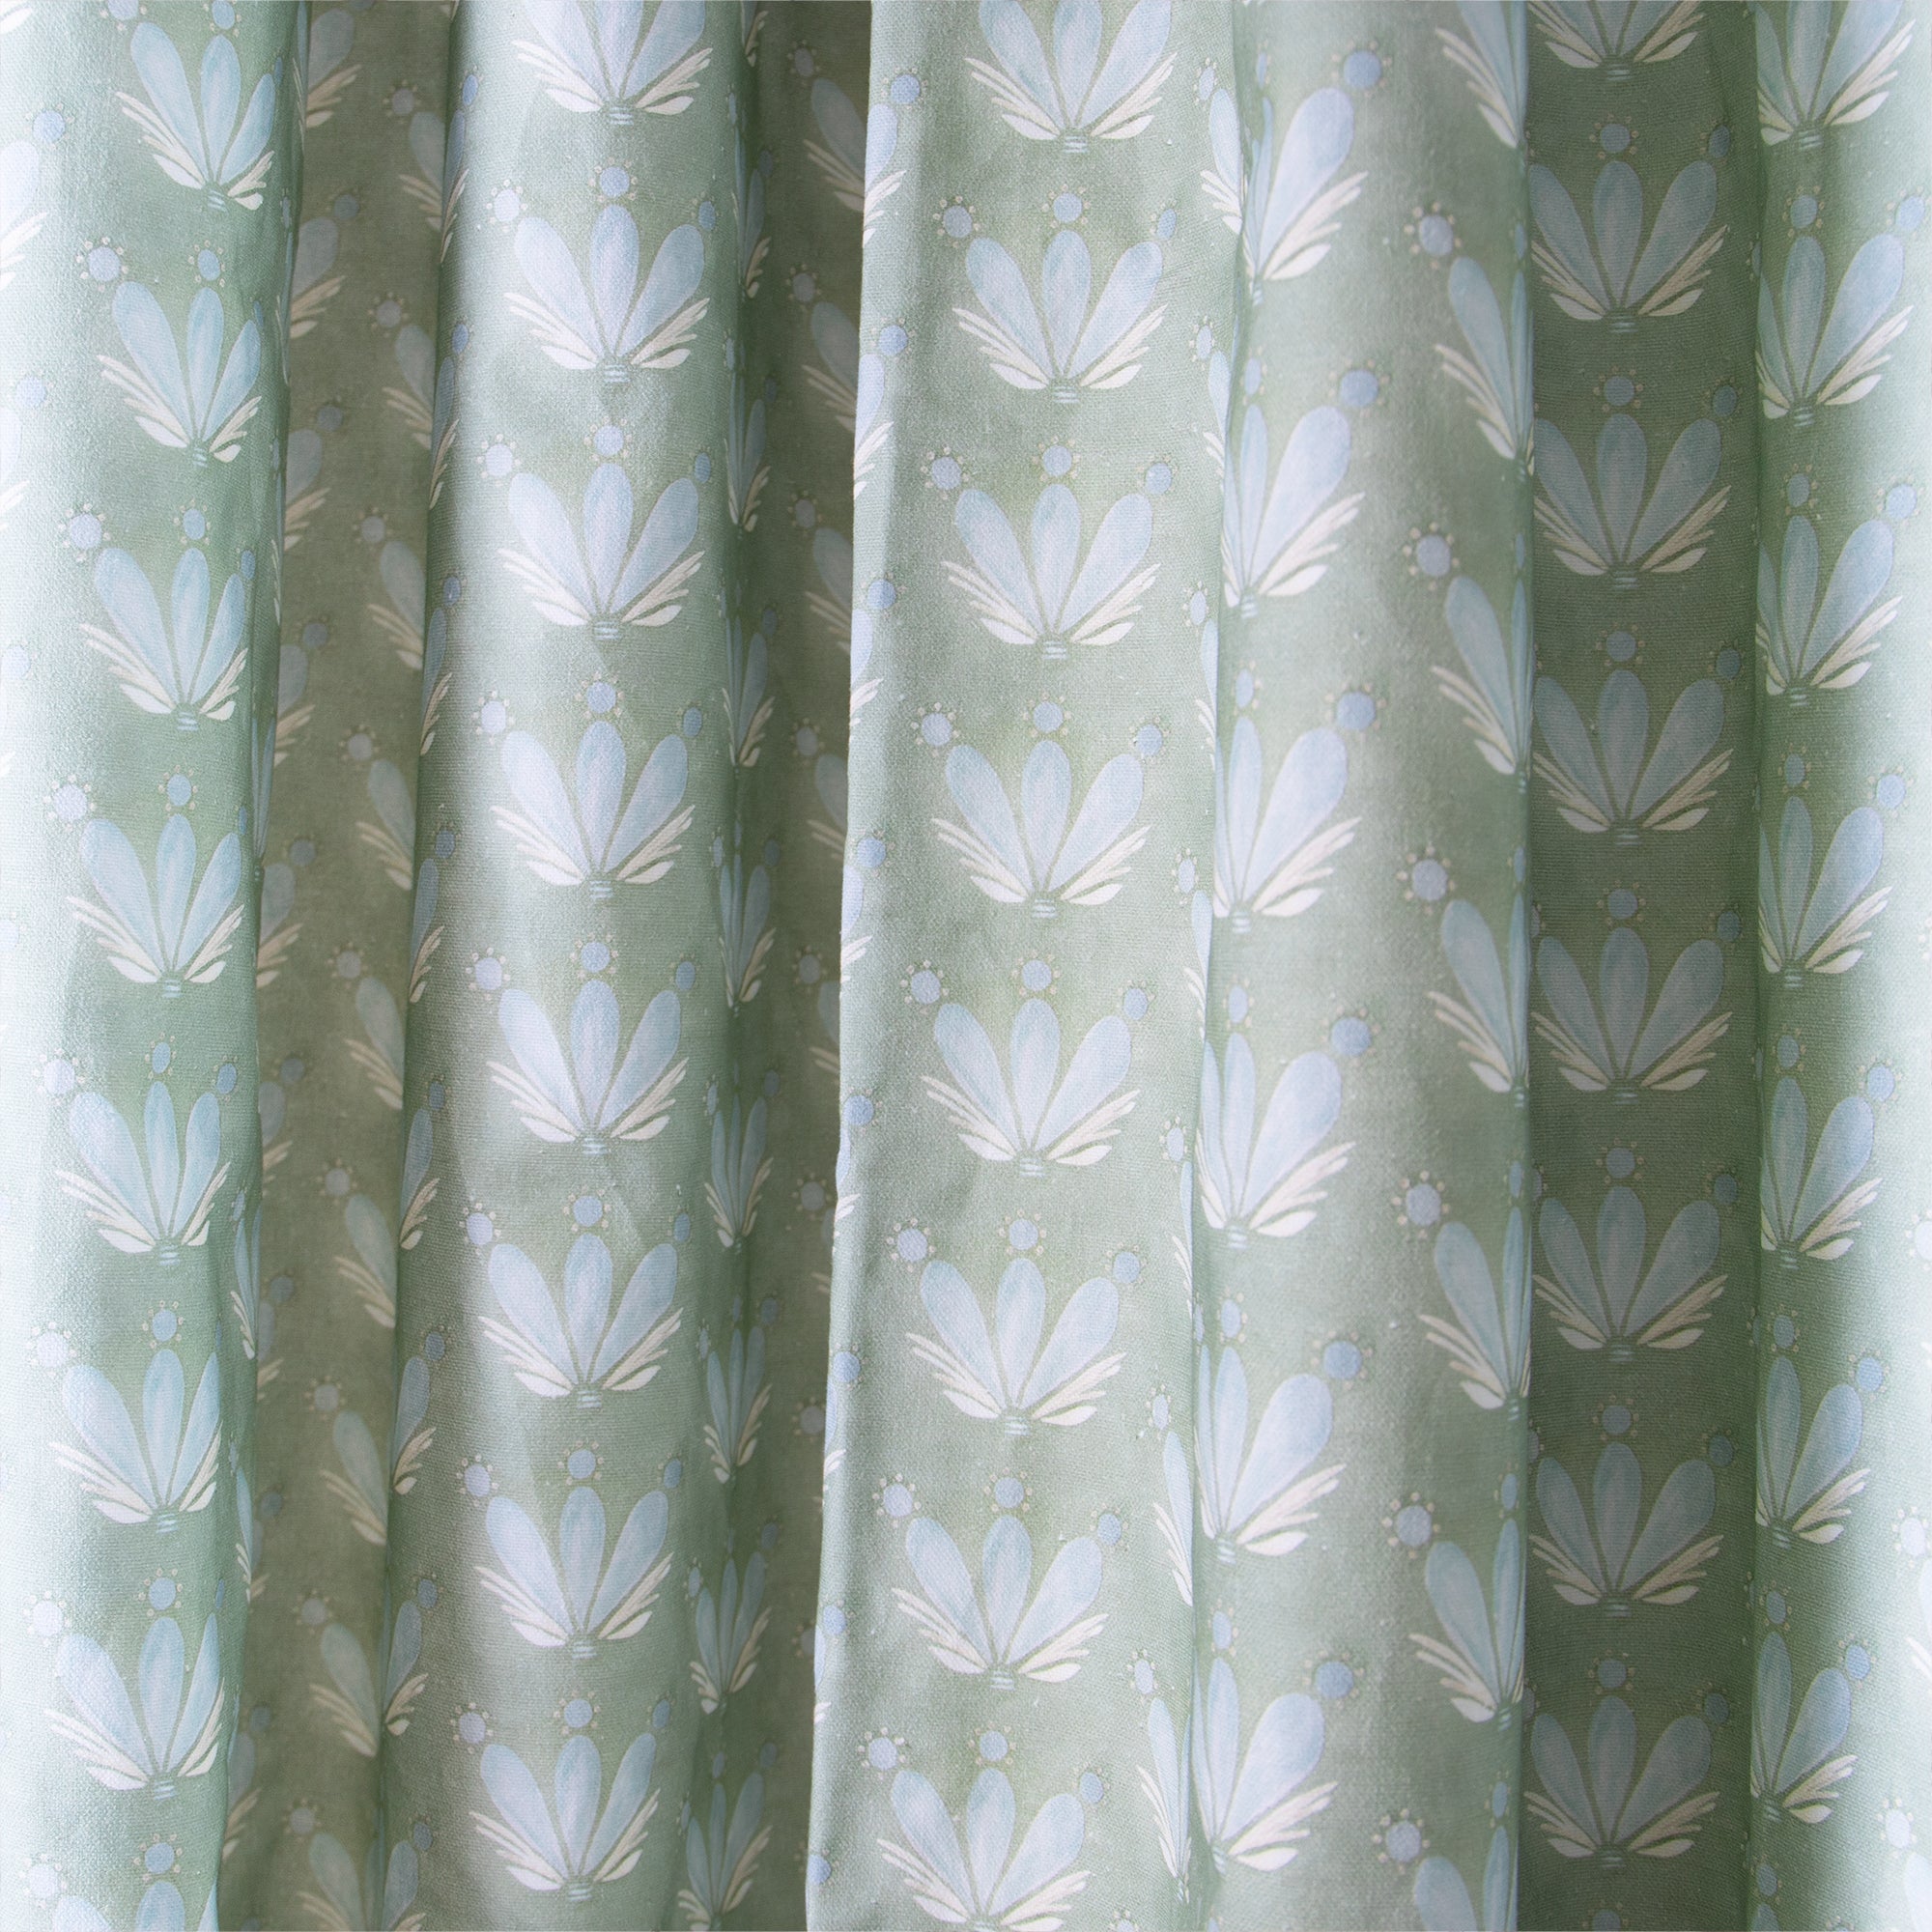 Blue & Green Floral Drop Repeat Printed Curtain Close-up